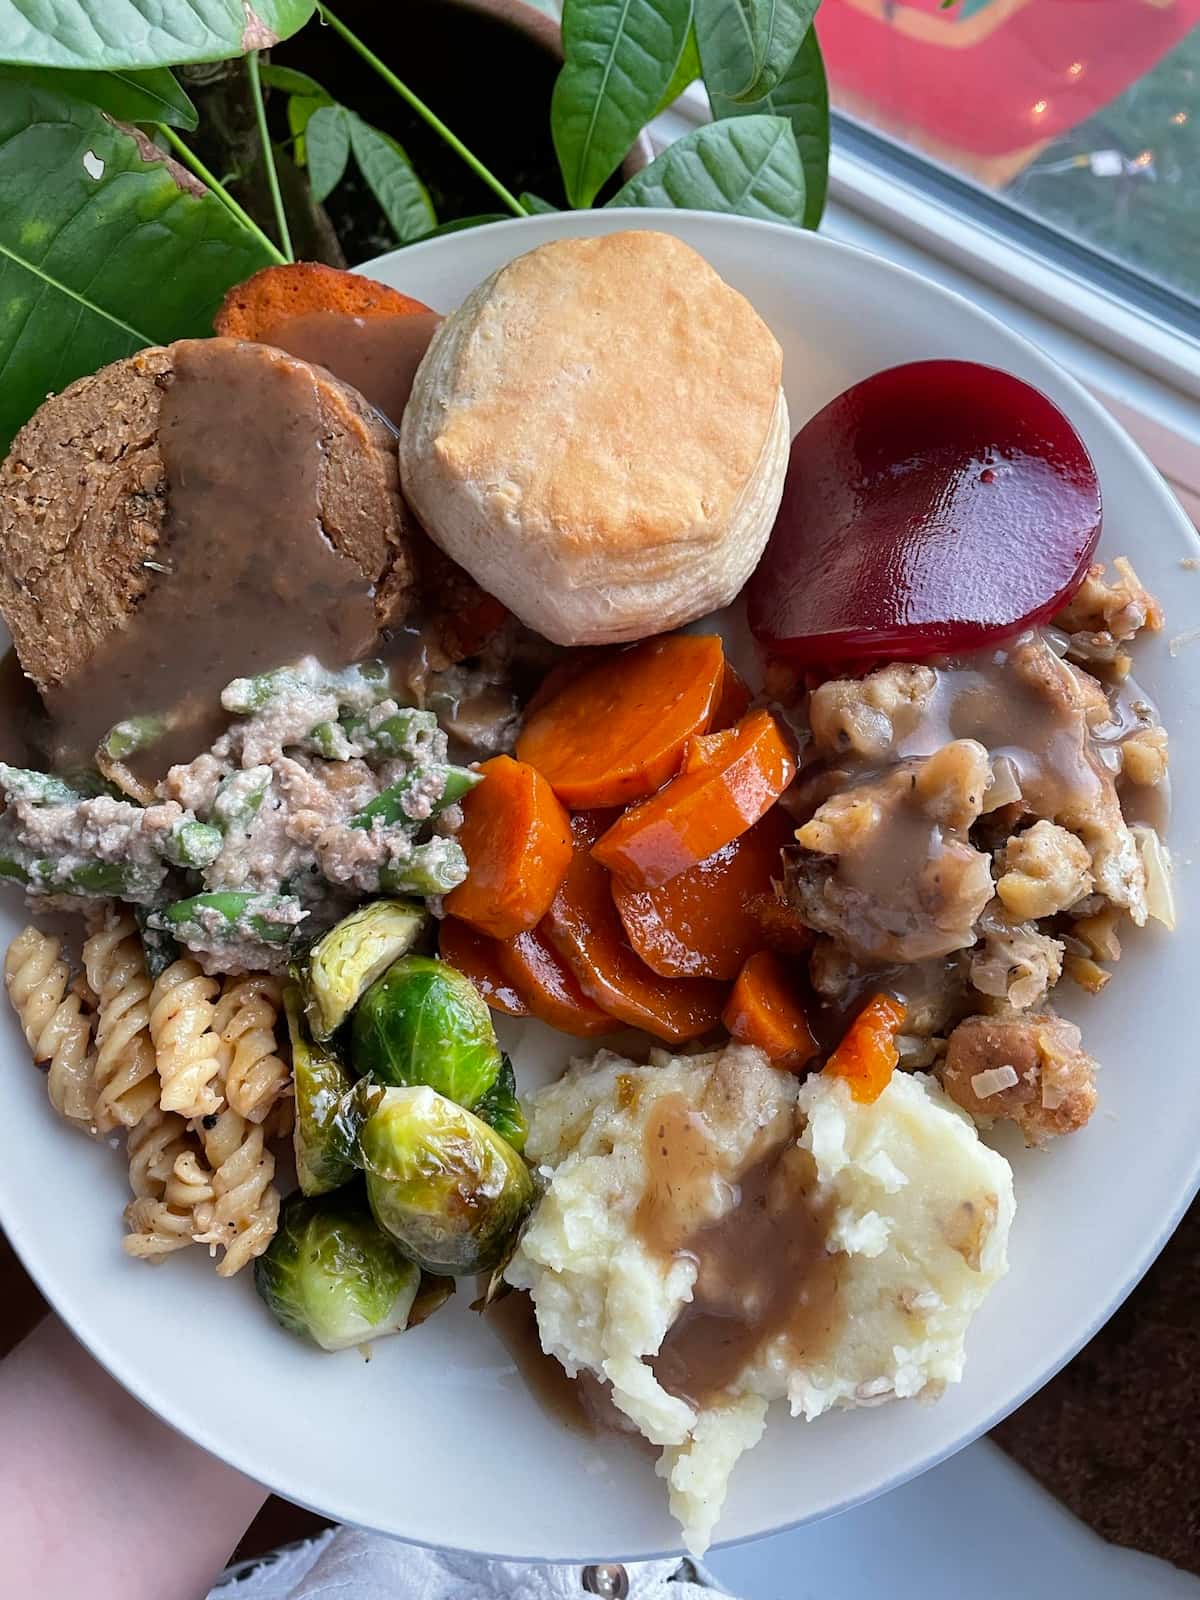 Vegan Thanksgiving plate of food including vegan turkey, mashed potato, roasted veggies, cranberry sauce, and a biscuit.